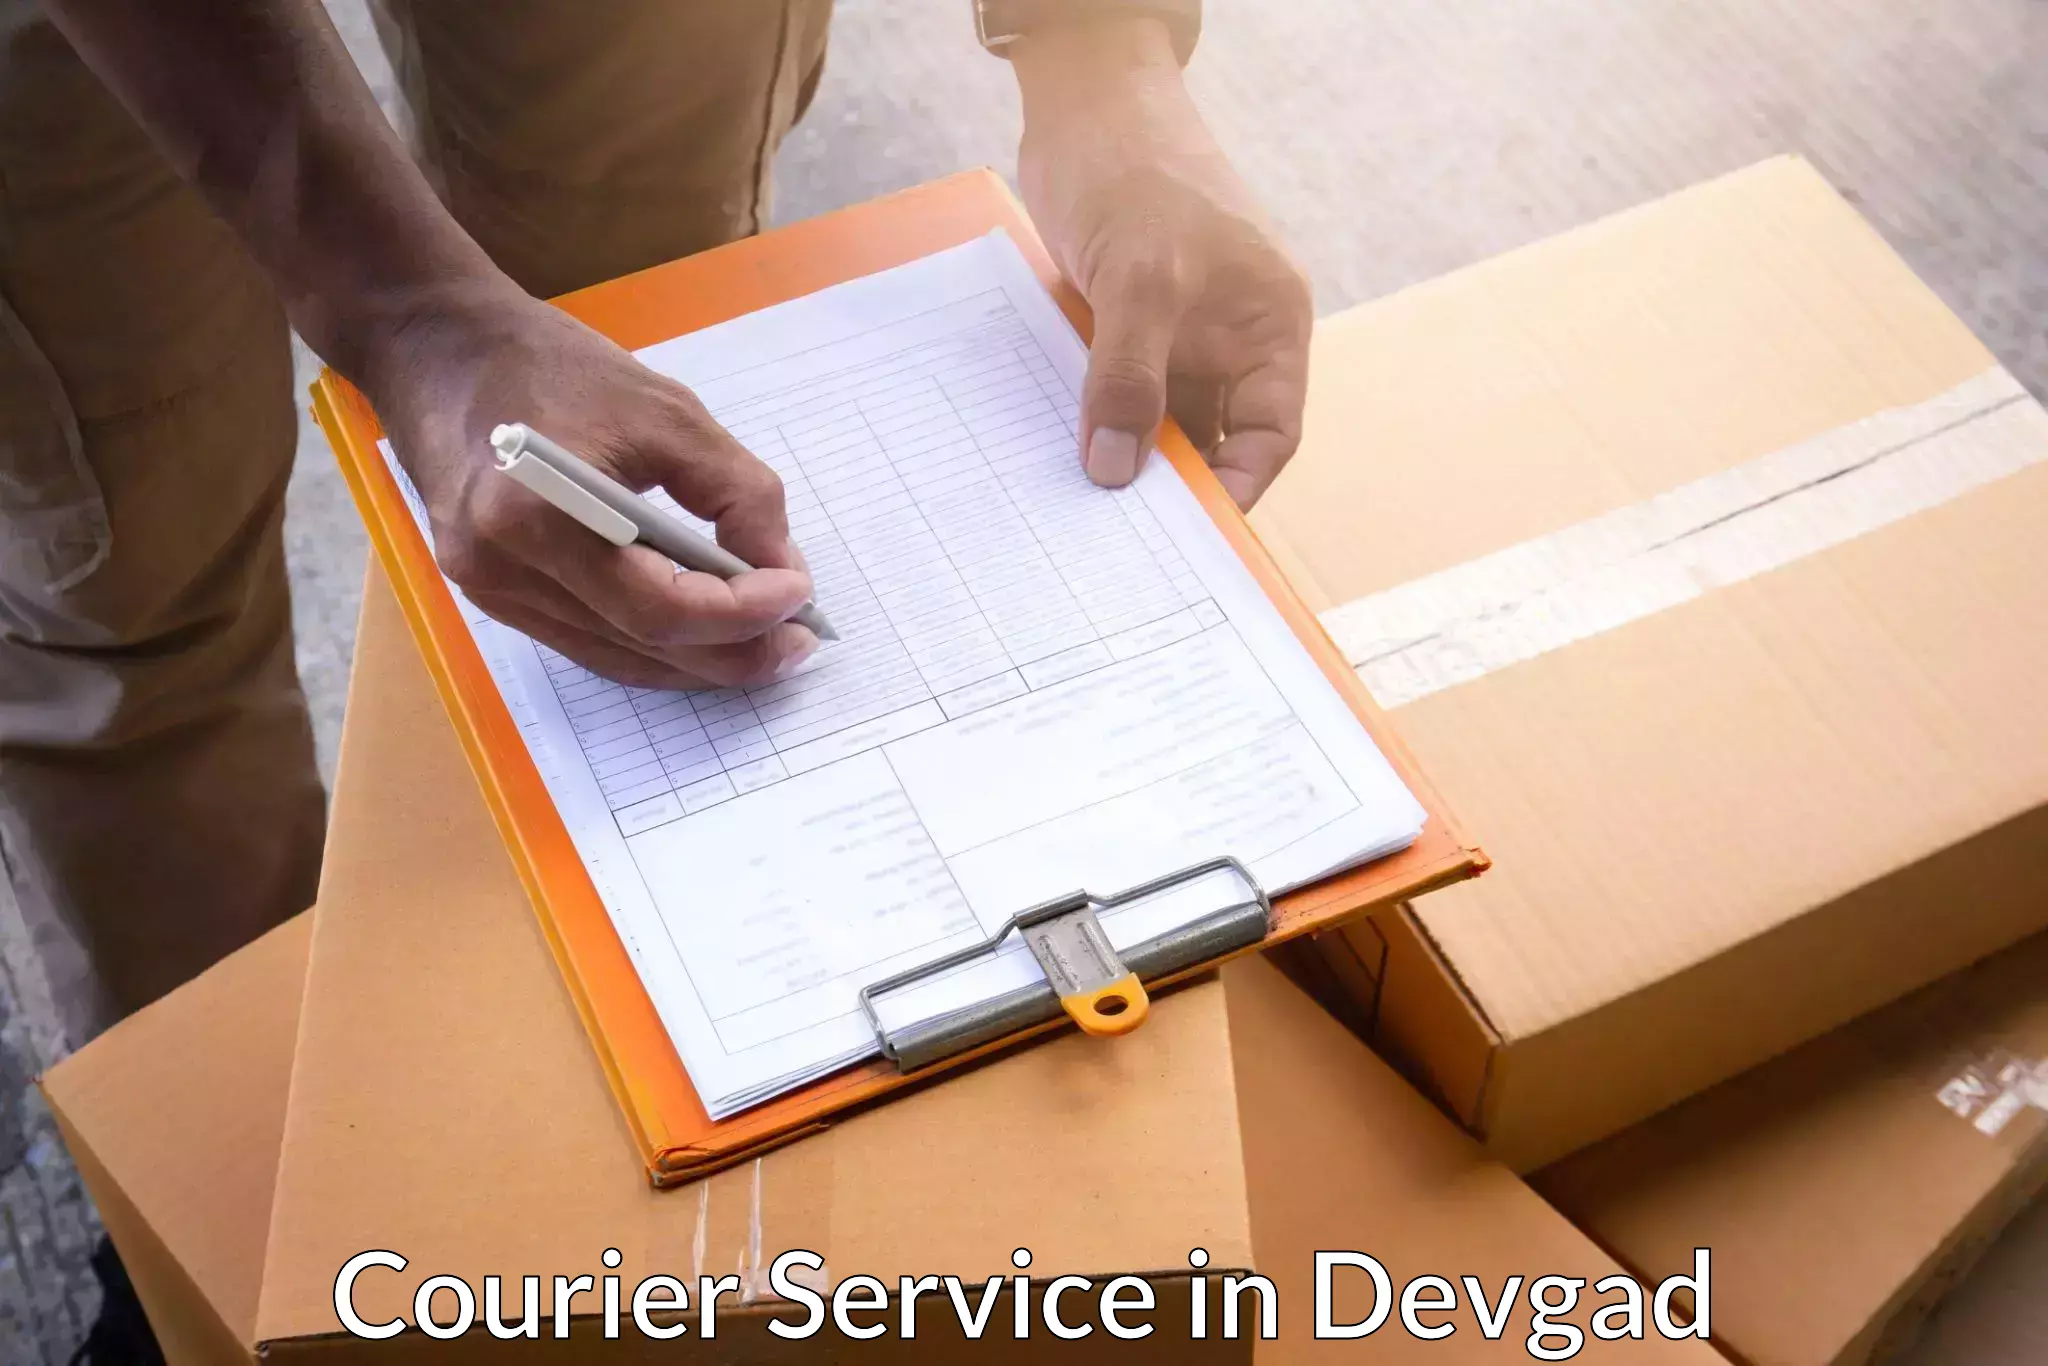 State-of-the-art courier technology in Devgad